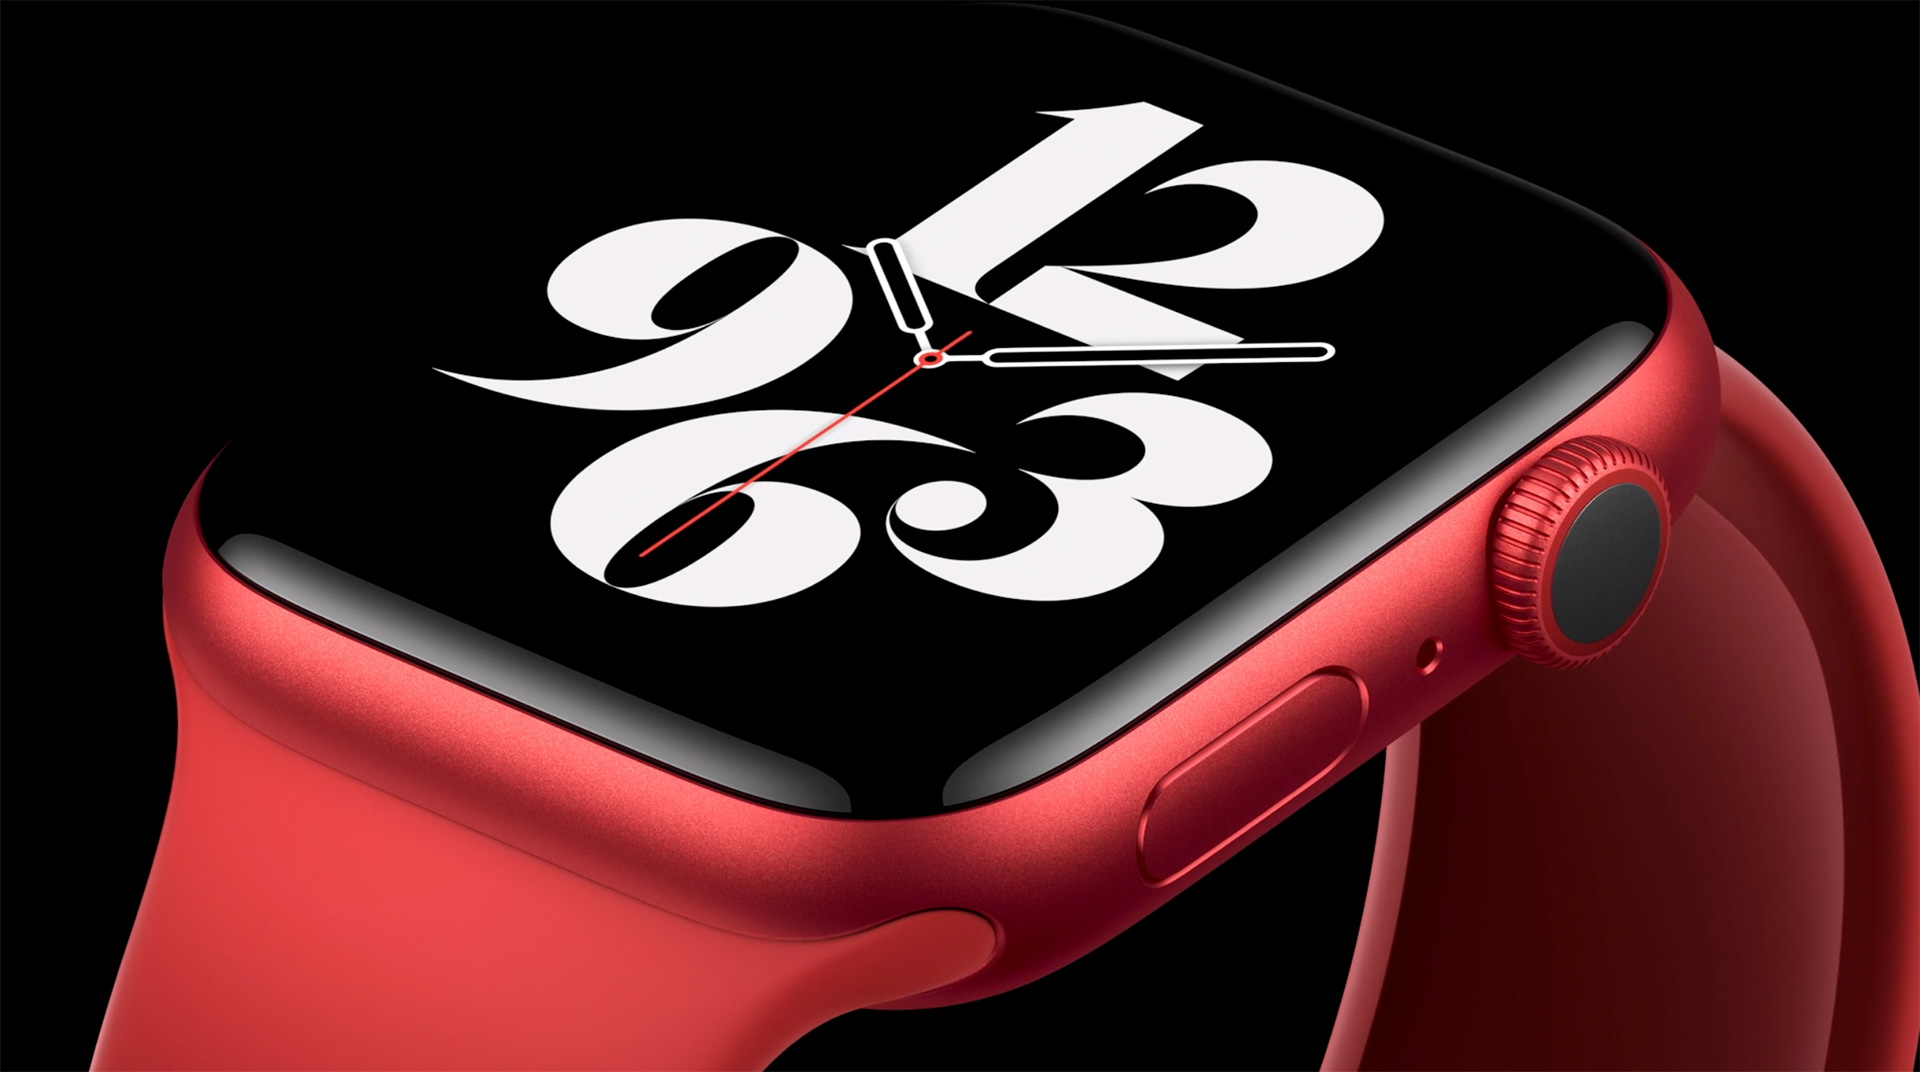 apple watch series 6 red